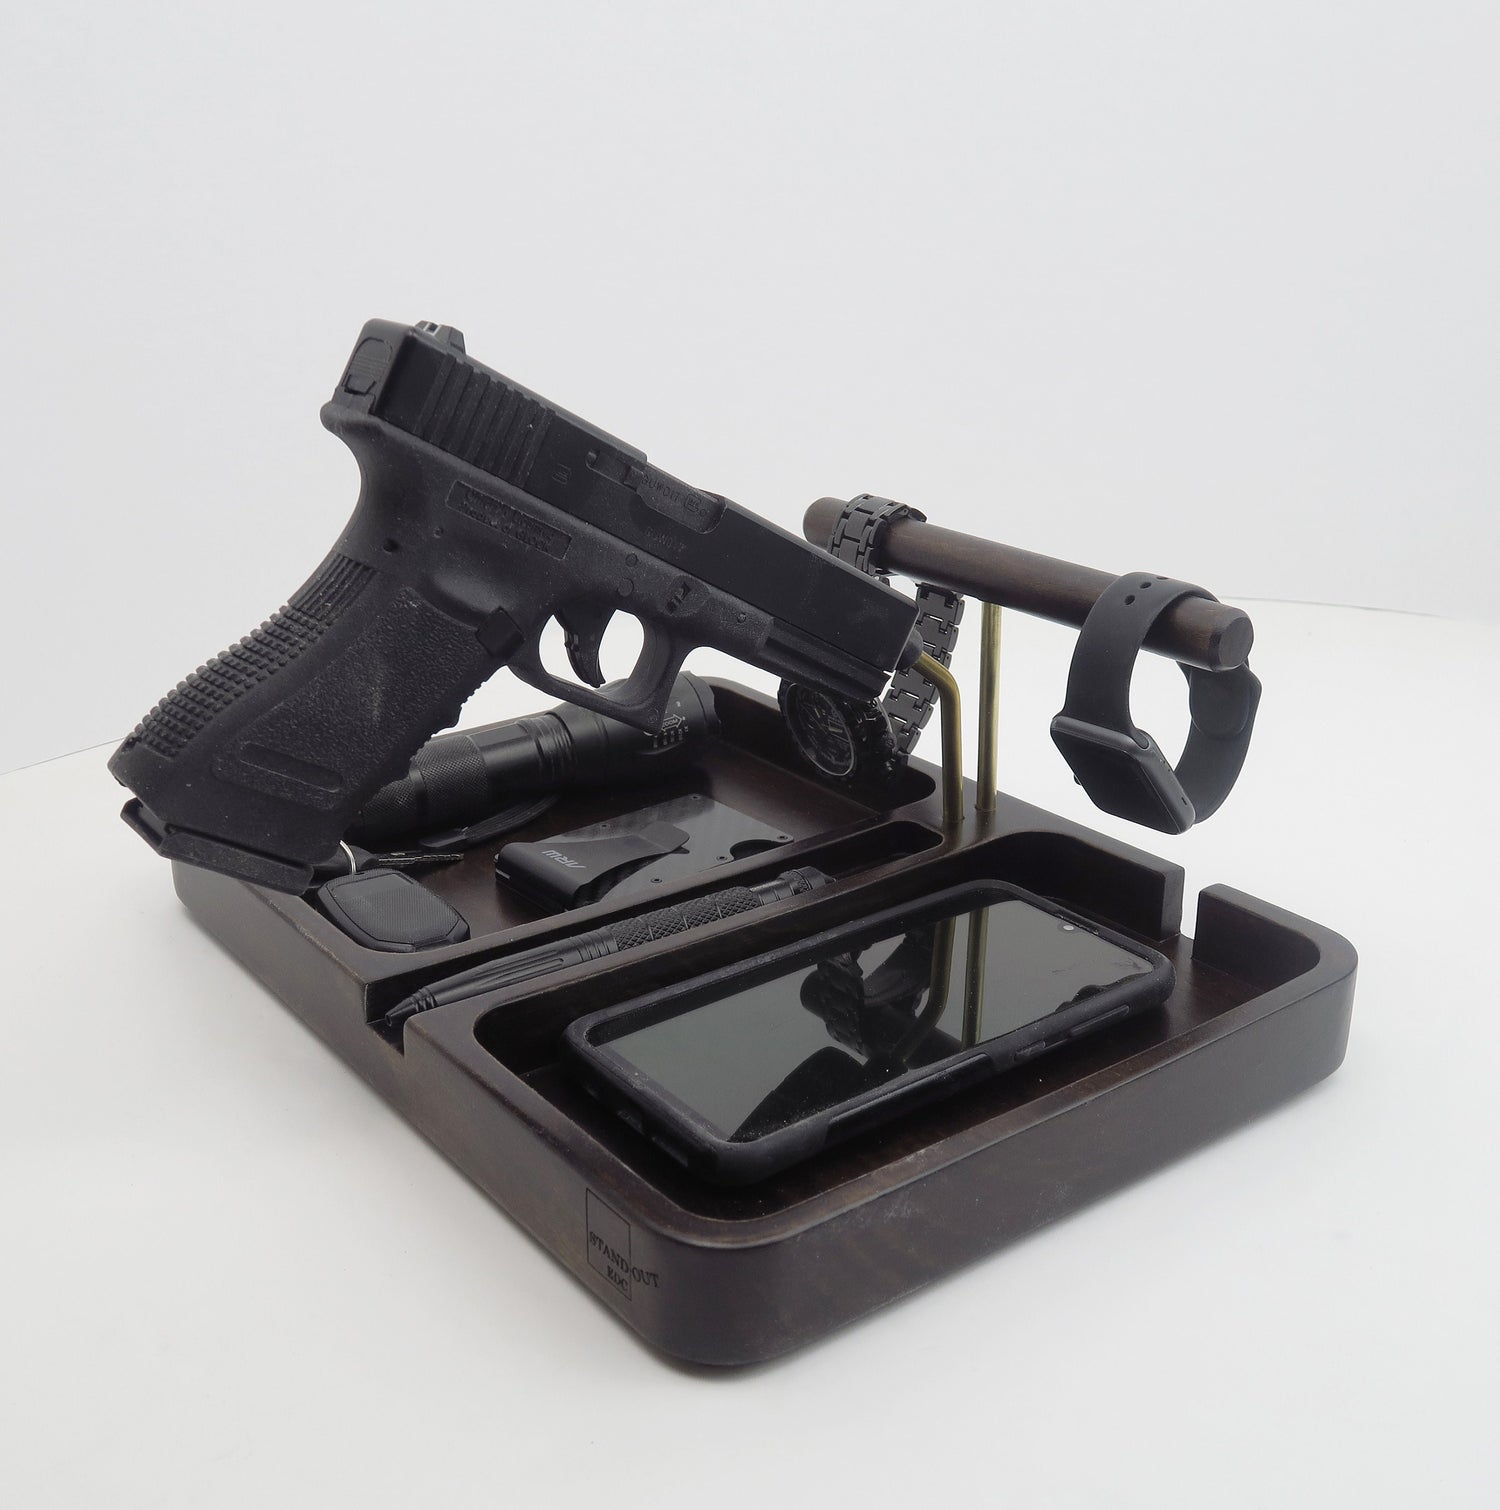 Fathers day gift, organizer with accessory bar , Station for gun, bedside table  Standout EDC   